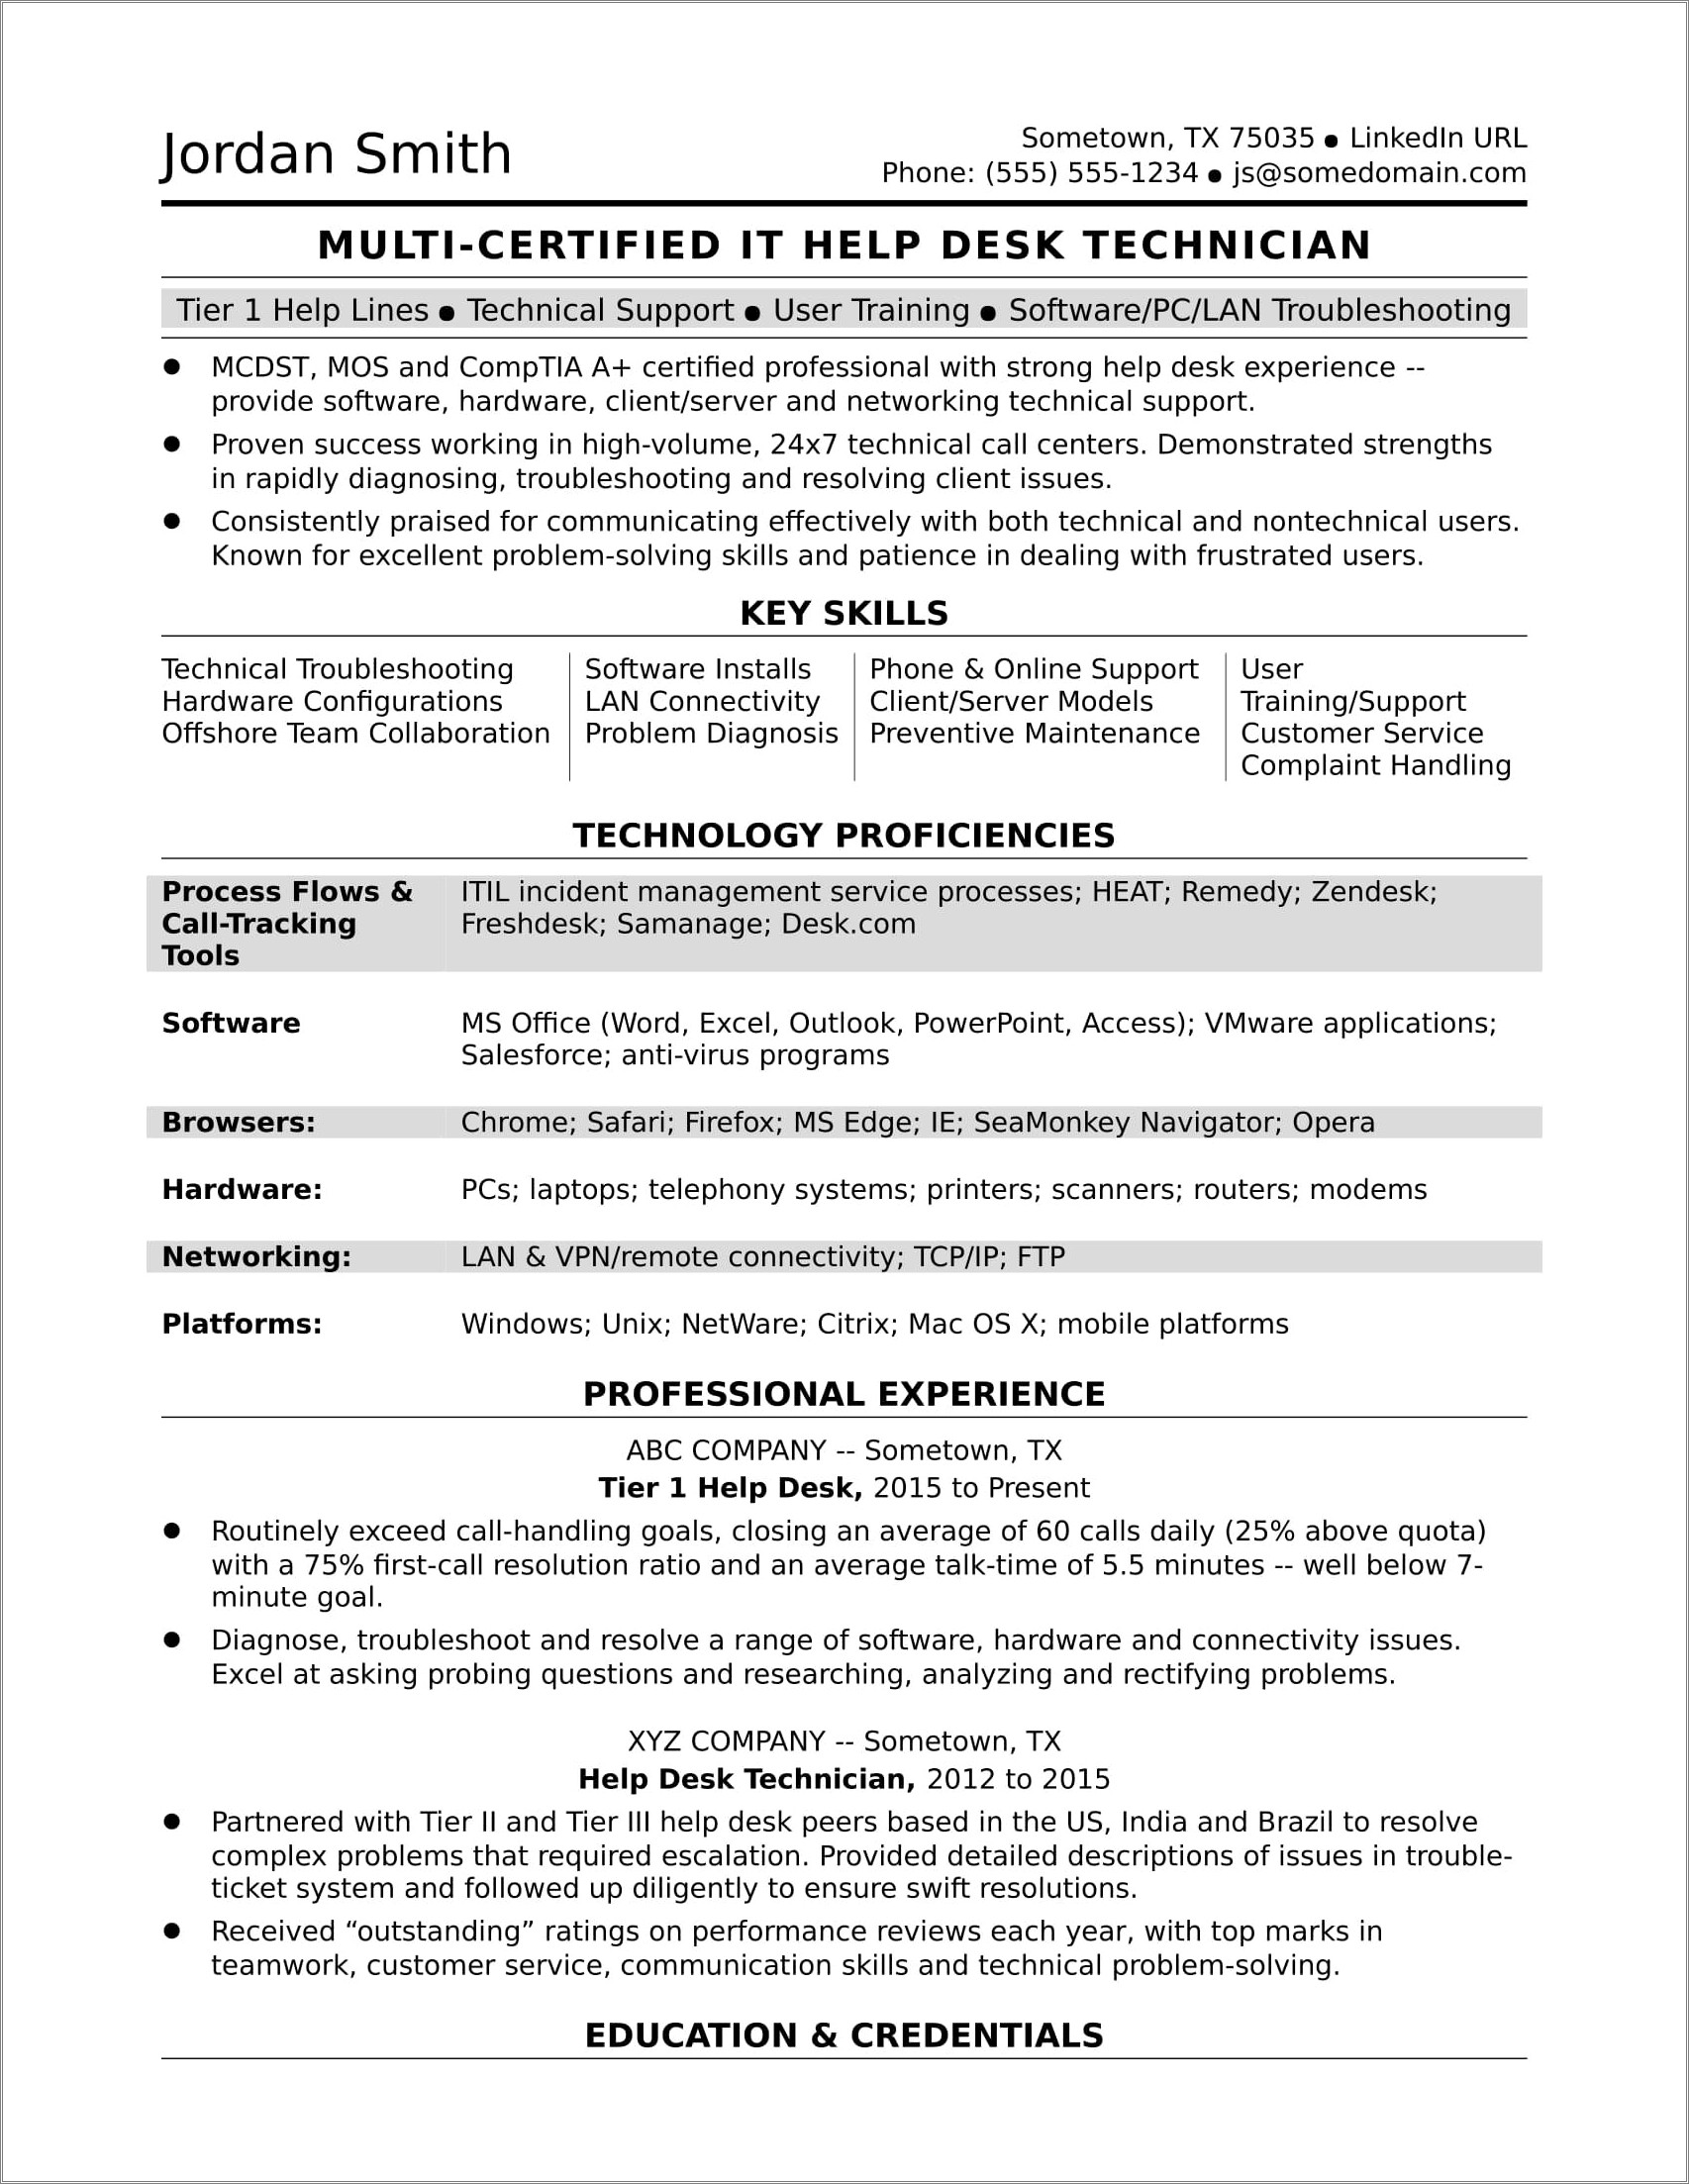 Resume That Looks Good But Works With Scanners